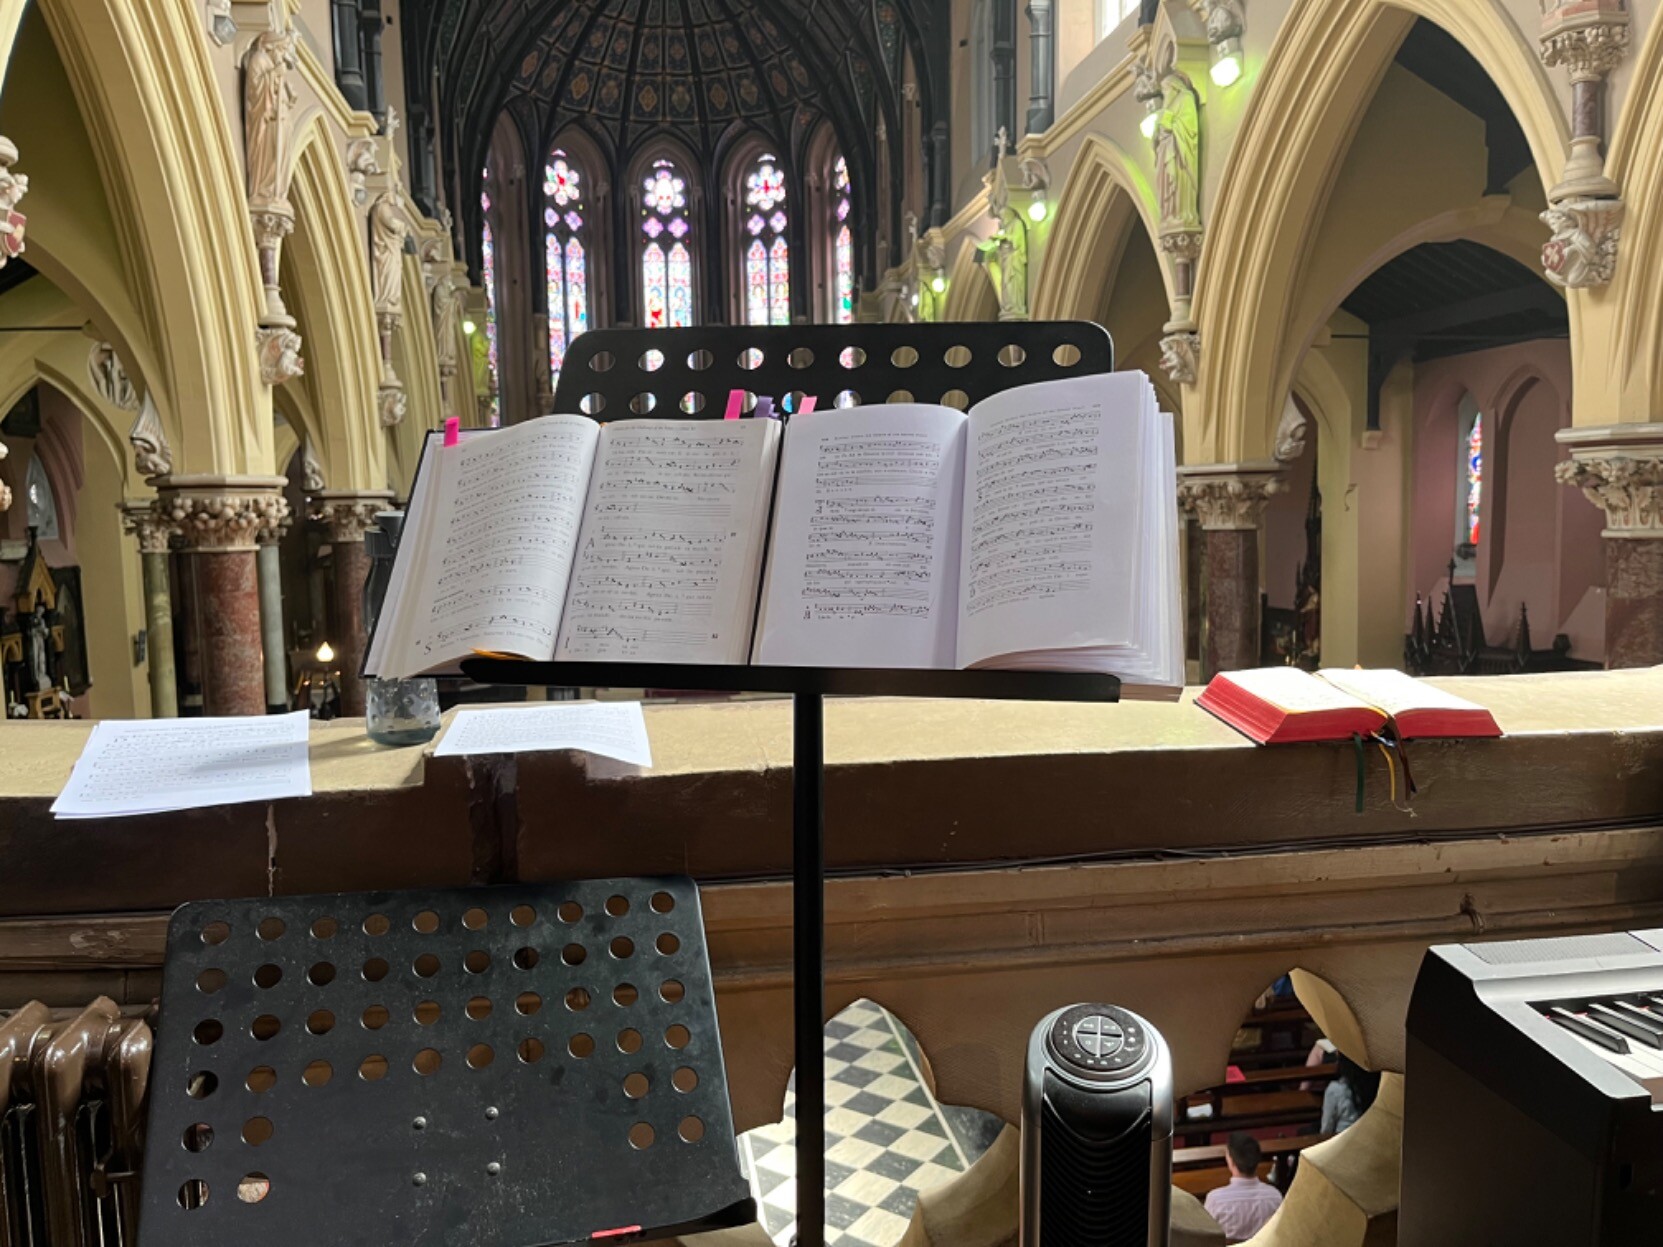 View from the organ gallery in the Church of Peter and Paul, with Gregorian chant books on a music stand